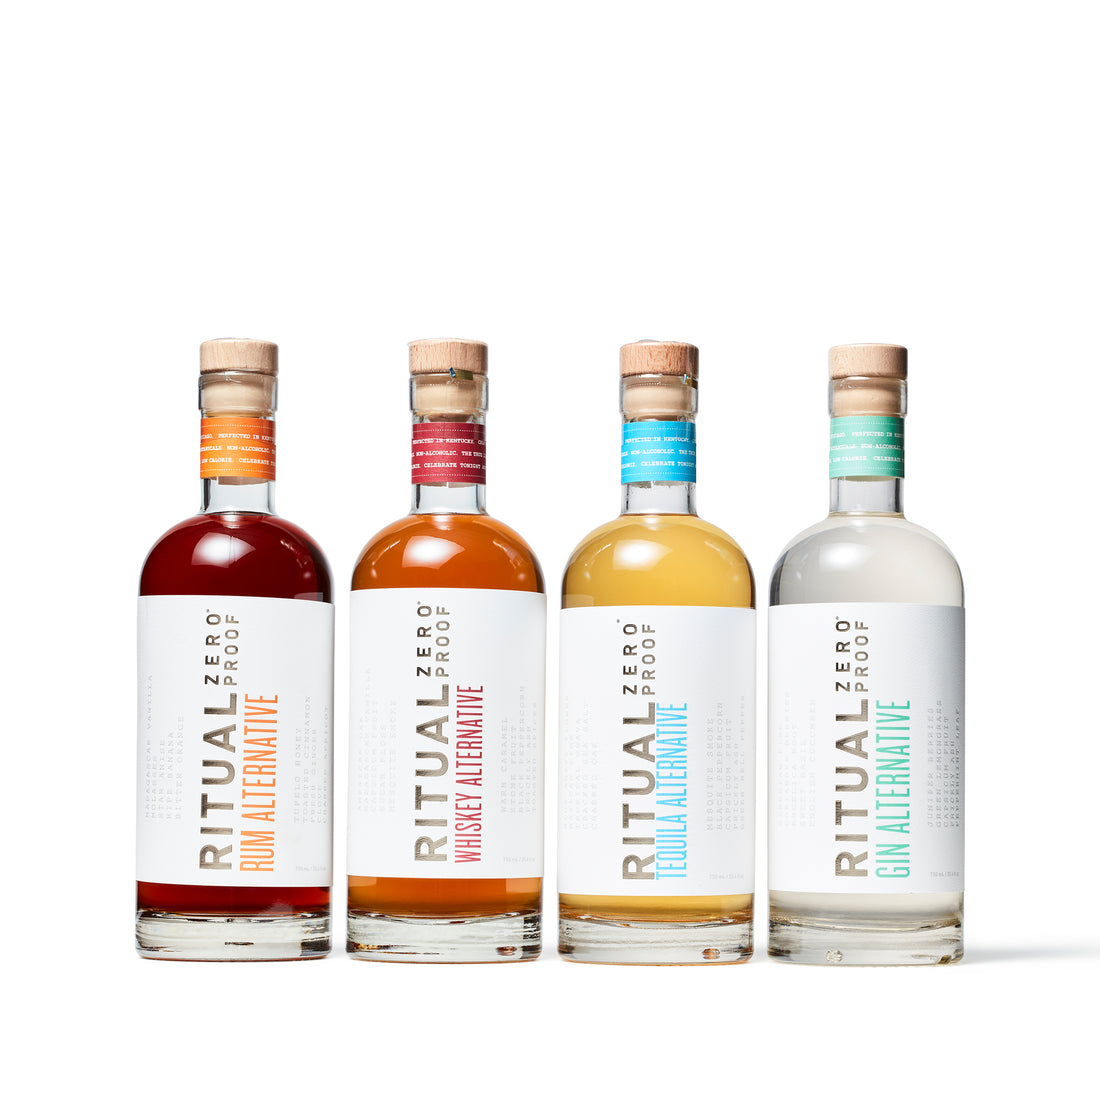 Ritual Zero Proof - Nonalcoholic Spirits 4pk Bundle (Rum, Whiskey, Tequila, Gin) - Boisson — Brooklyn's Non-Alcoholic Spirits, Beer, Wine, and Home Bar Shop in Cobble Hill